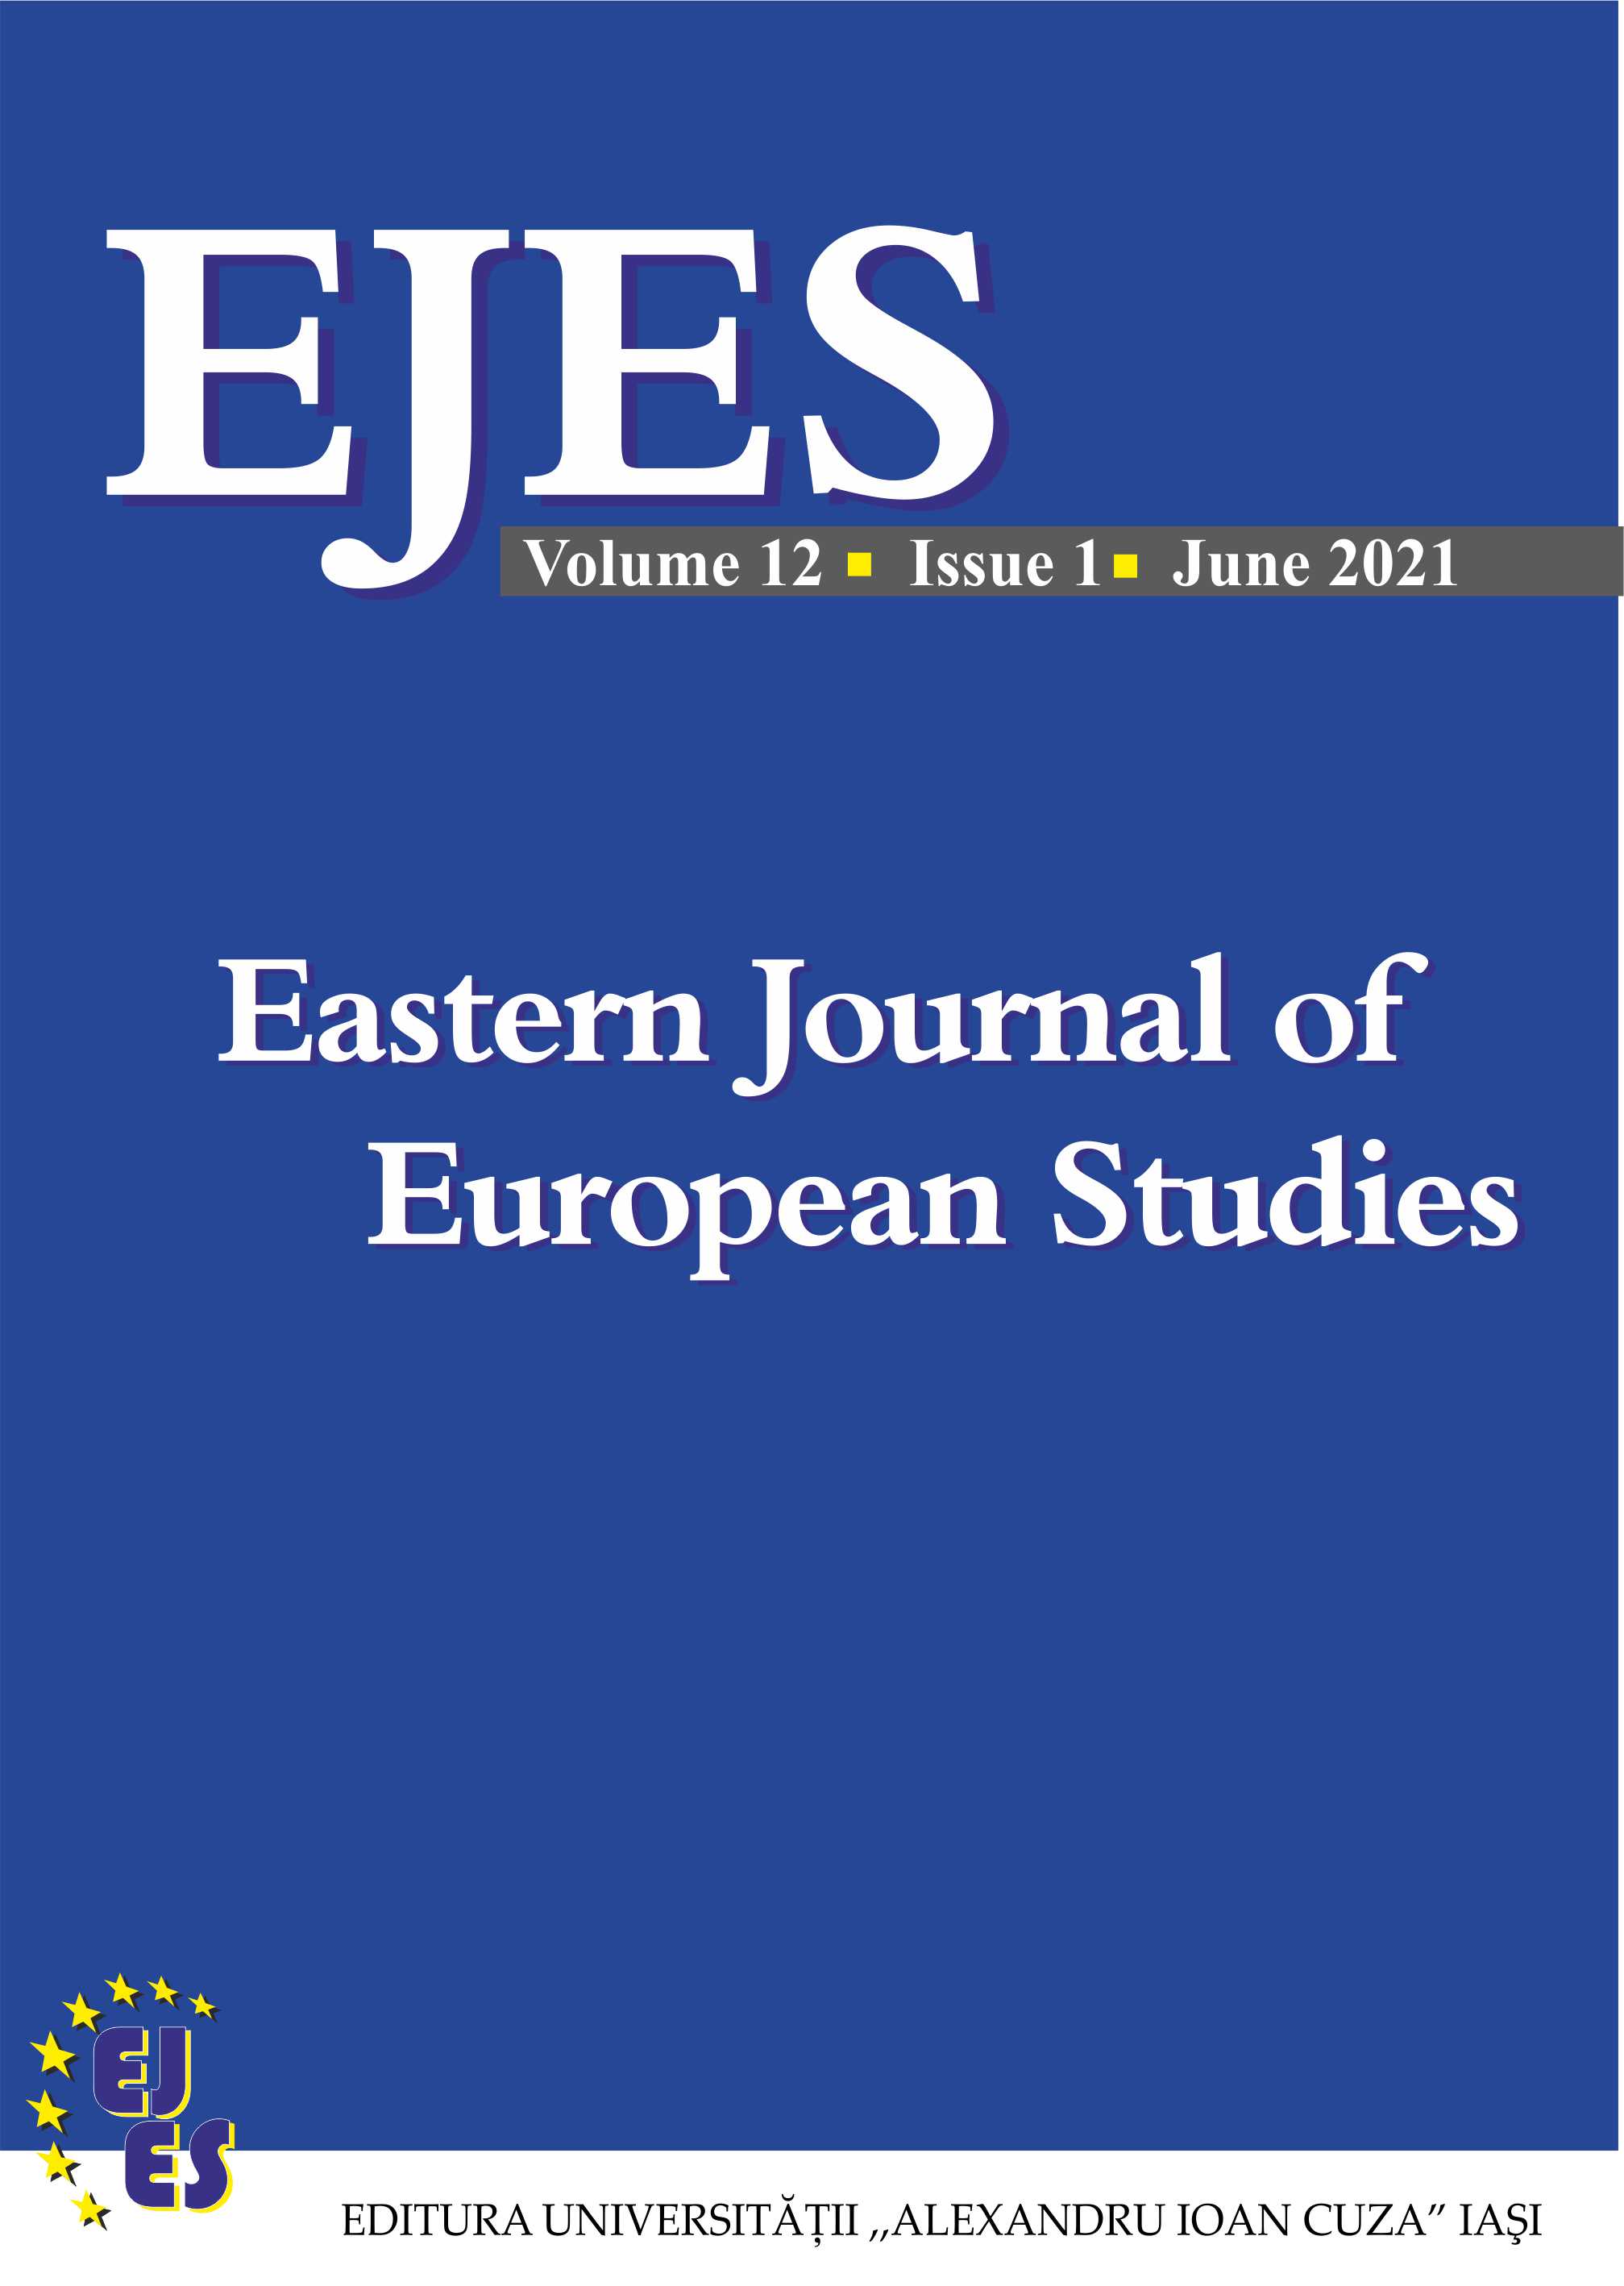 External debt sustainability in the transition economies of southeast Europe: an application by wavelet-based unit root tests